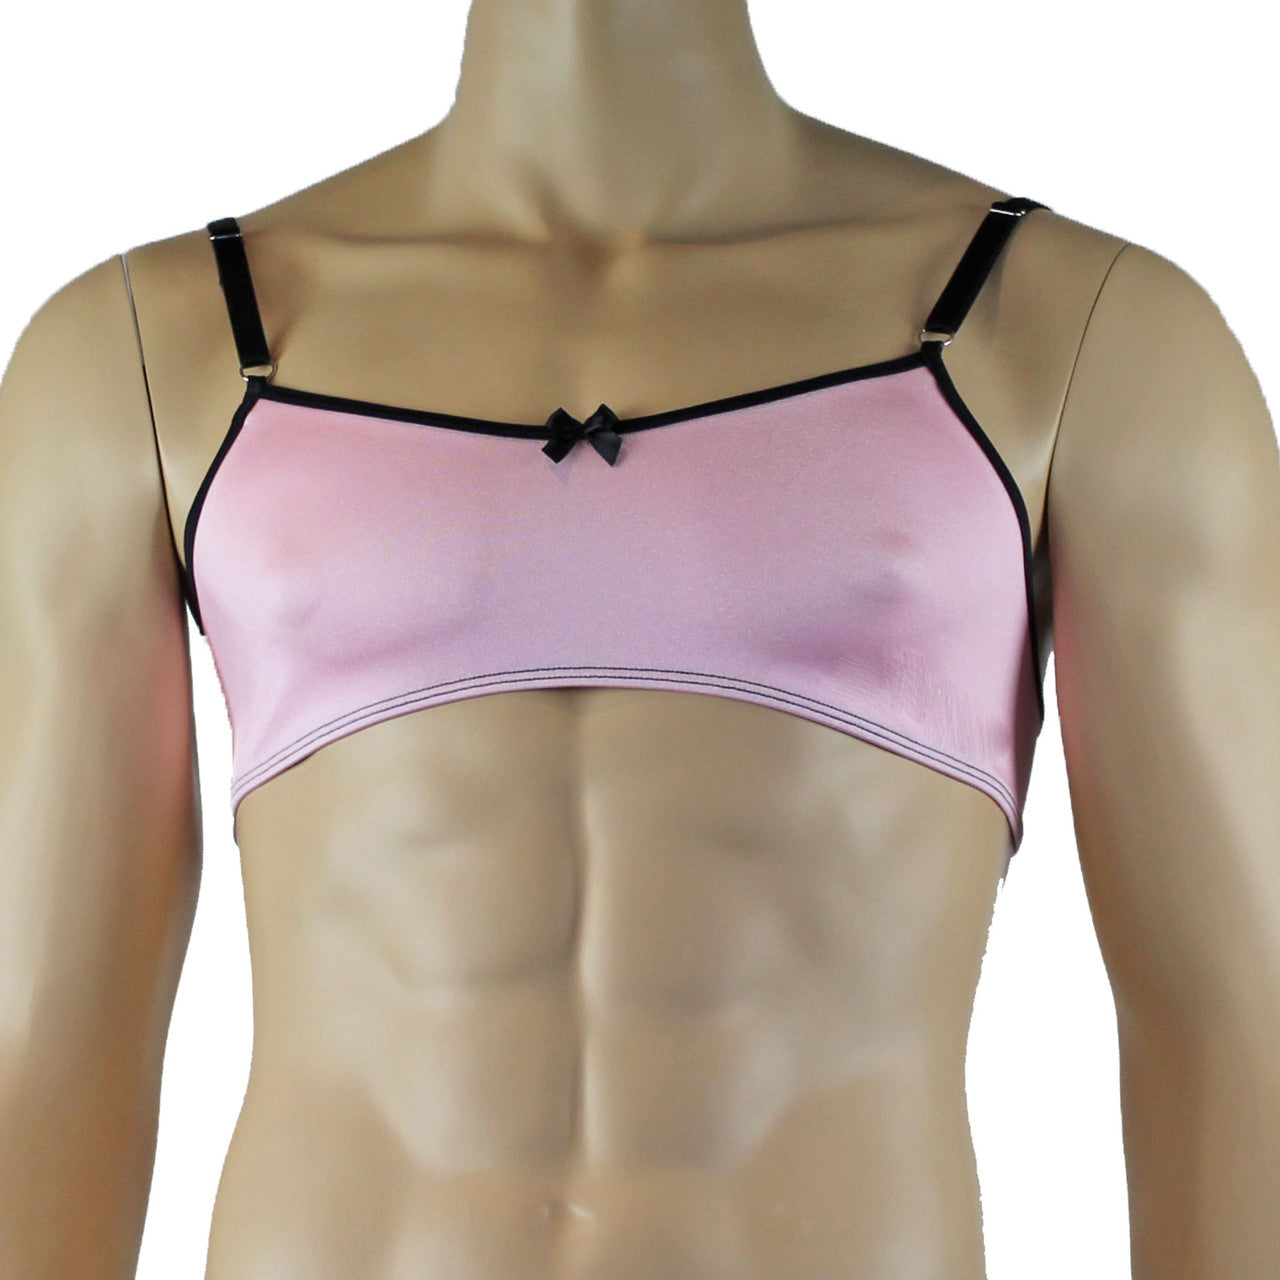 Mens Lingerie Twinkle Spandex Bra with Bow, Light Pink & Black